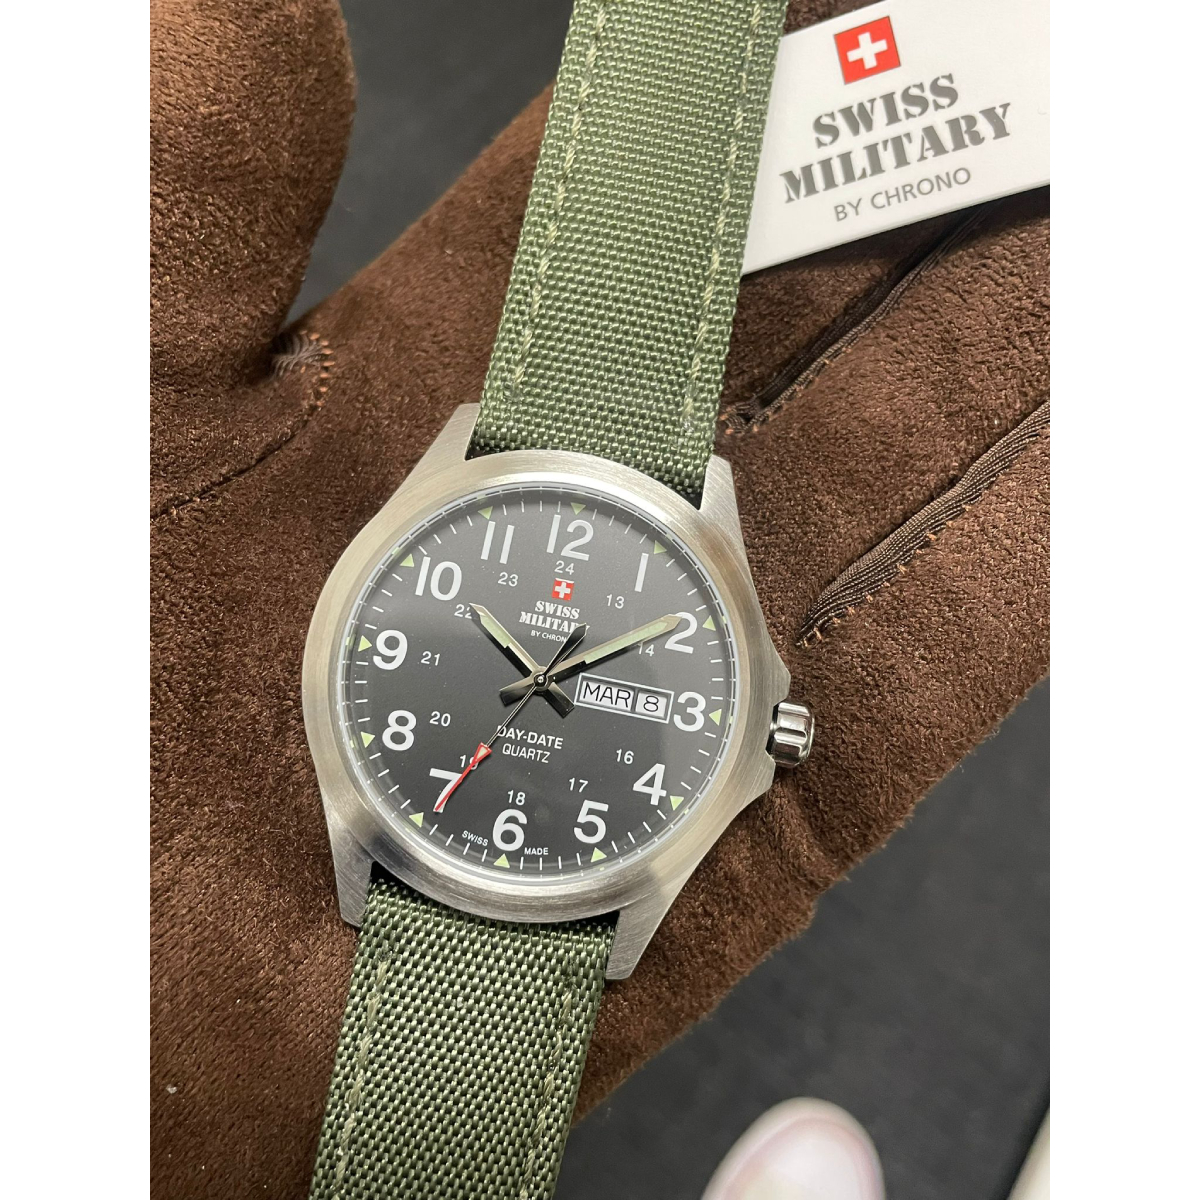 SWISS-MILITARY GENT’S WATCH SMP36040-05.001